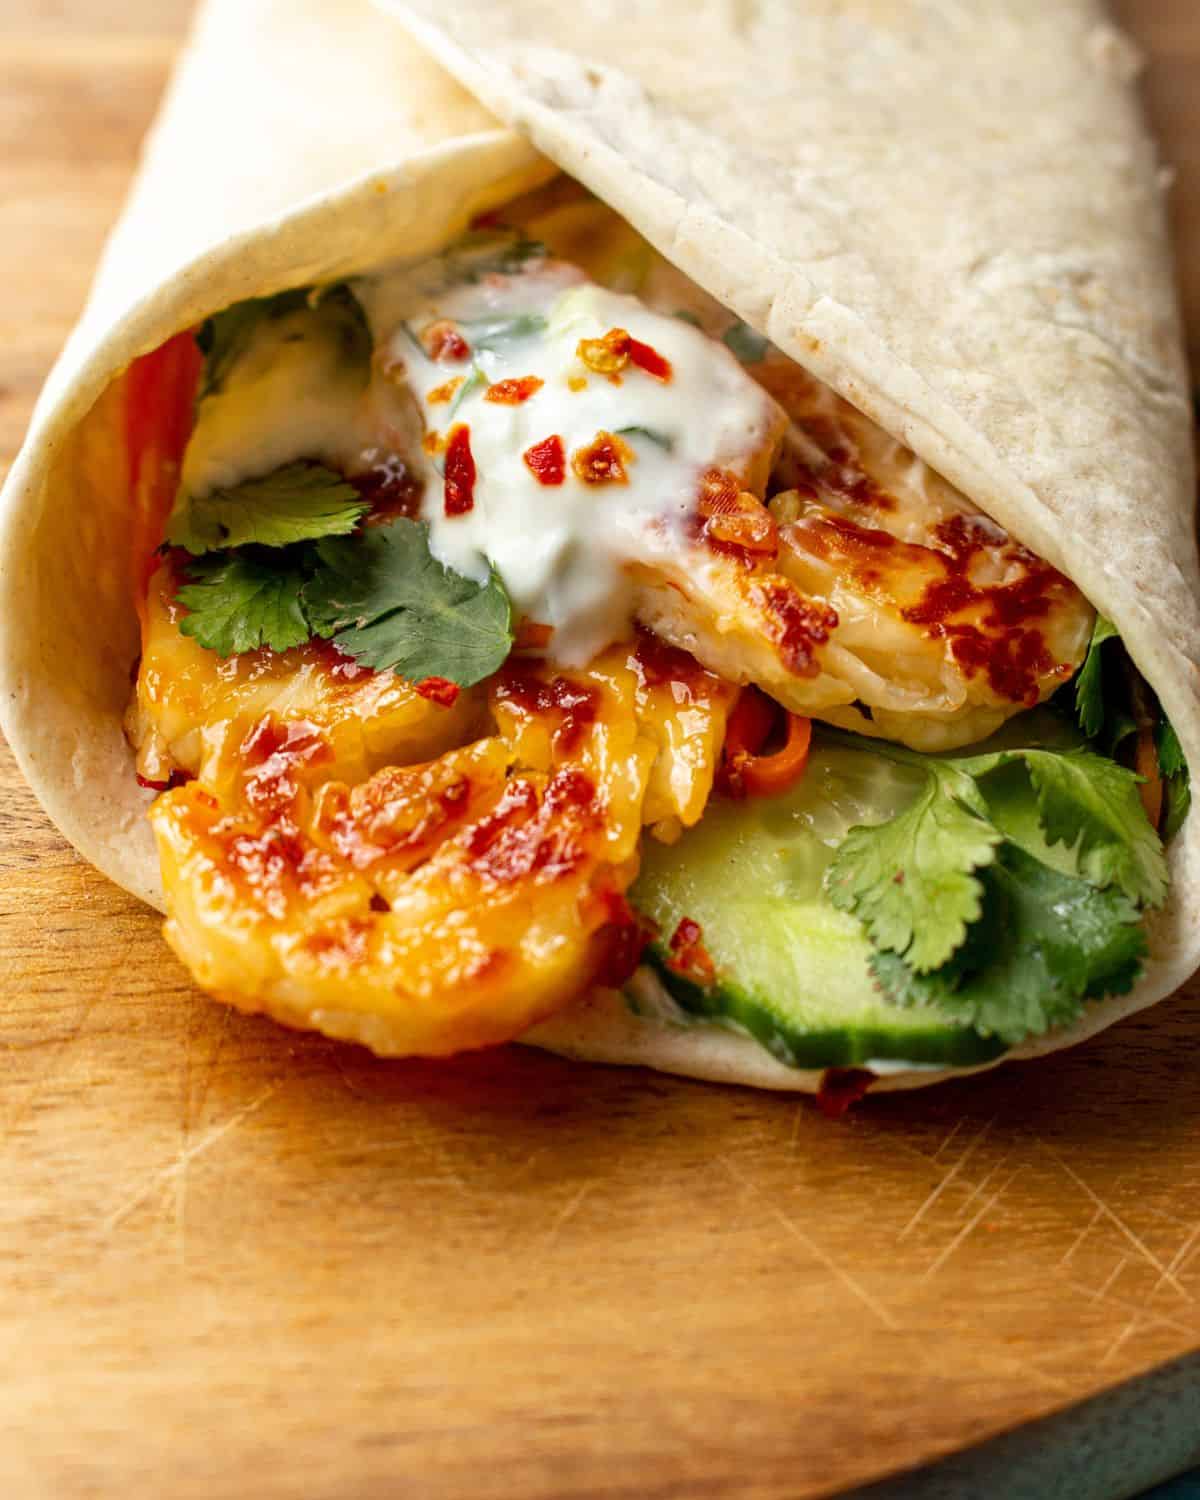 Wrap folded over and filled with golden browned halloumi, cucumber, lettuce and Tzatziki on a wooden board.